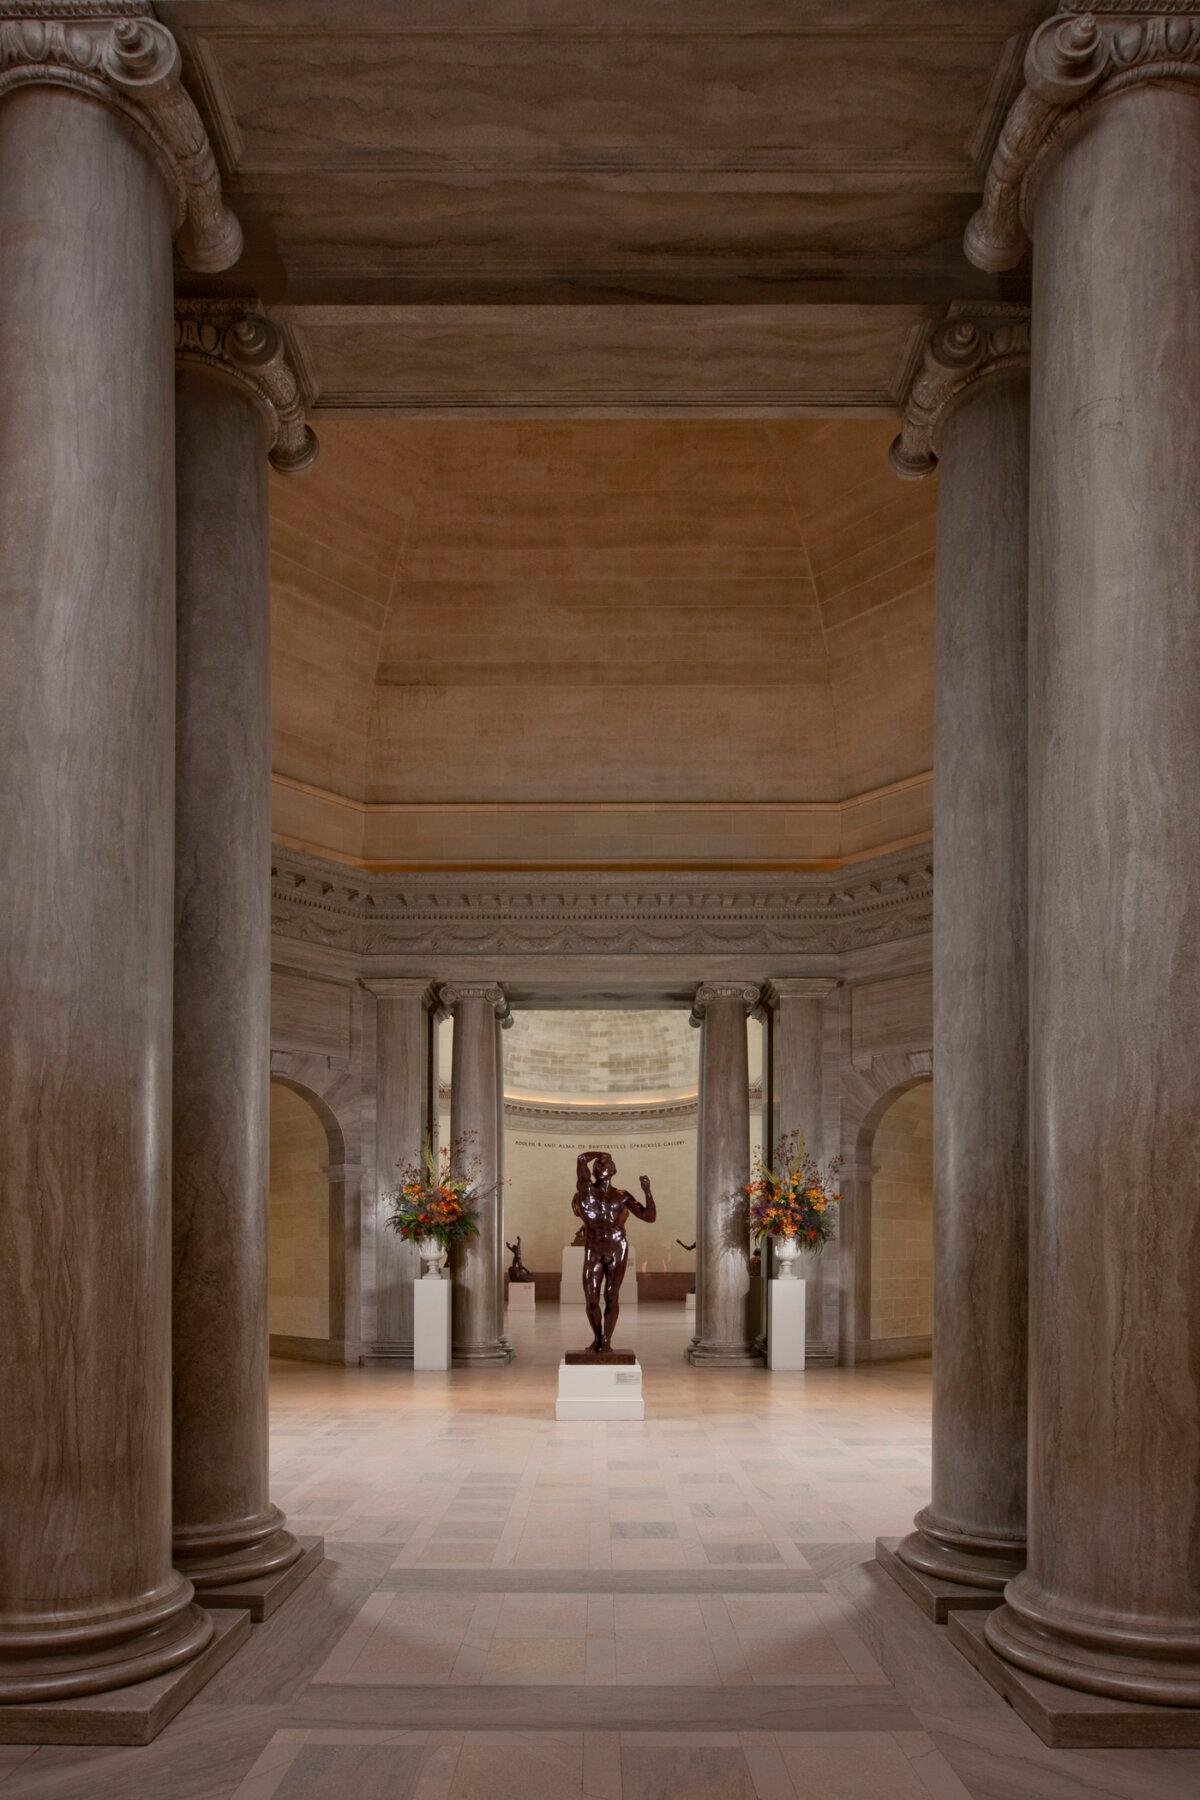 The entrance to the Legion leads down a hall of palatial marble columns typical of the neoclassical style and into a large rotunda that itself leads to various rooms of exhibits. (Courtesy of the Legion of Honor)